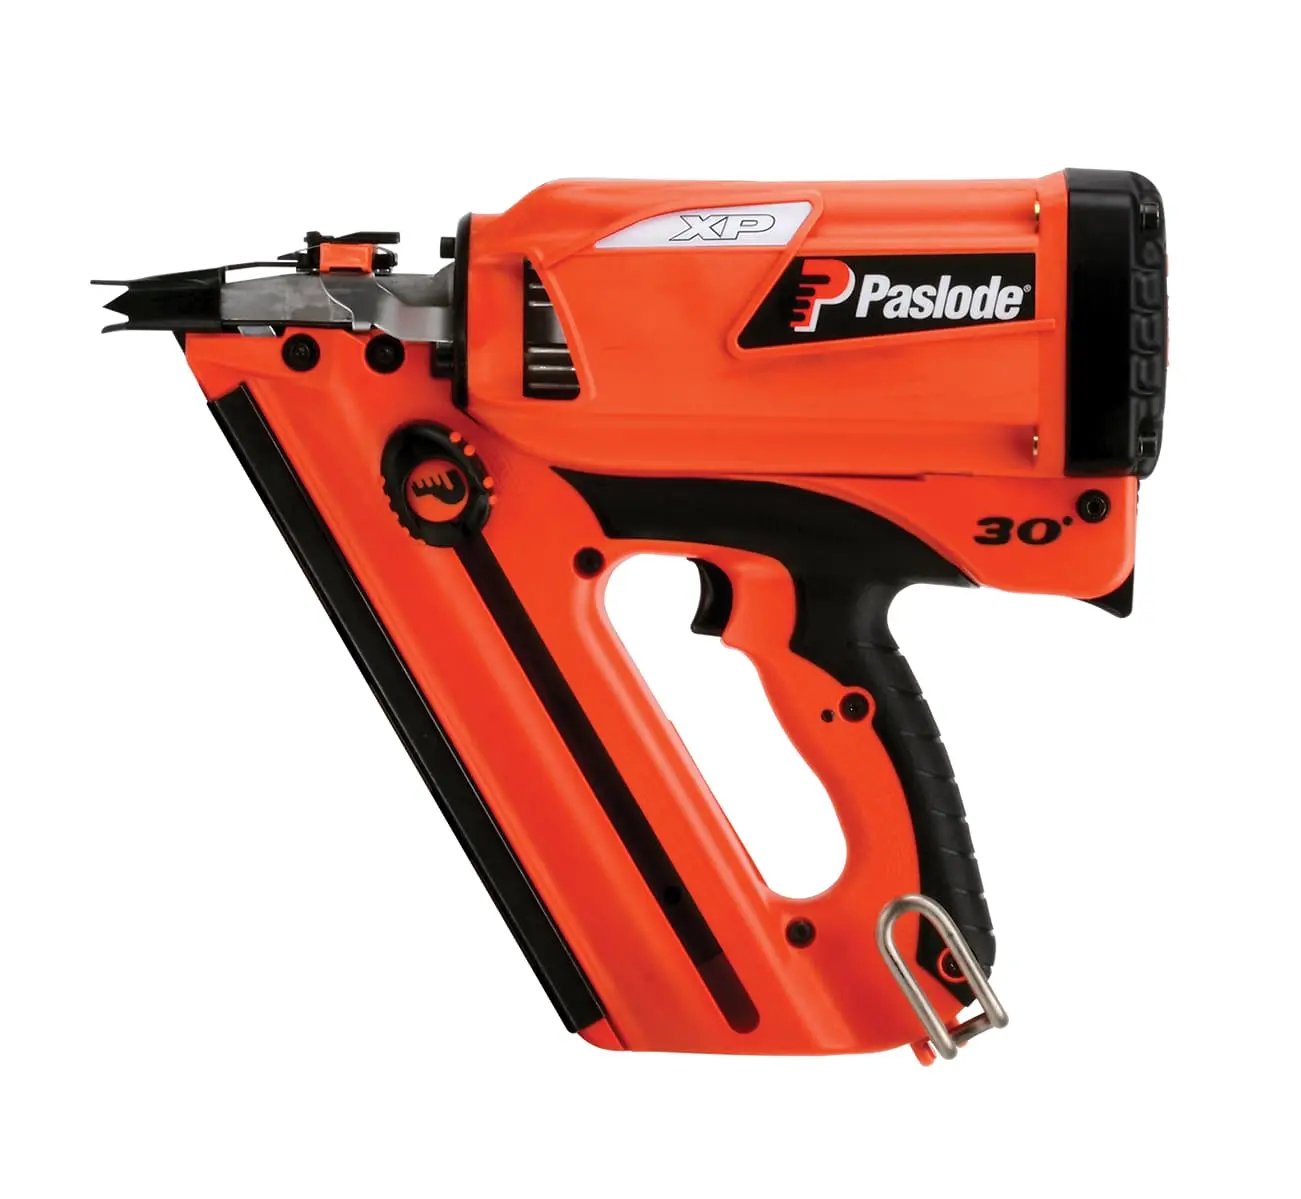 How to Use Paslode Framing Nailer 